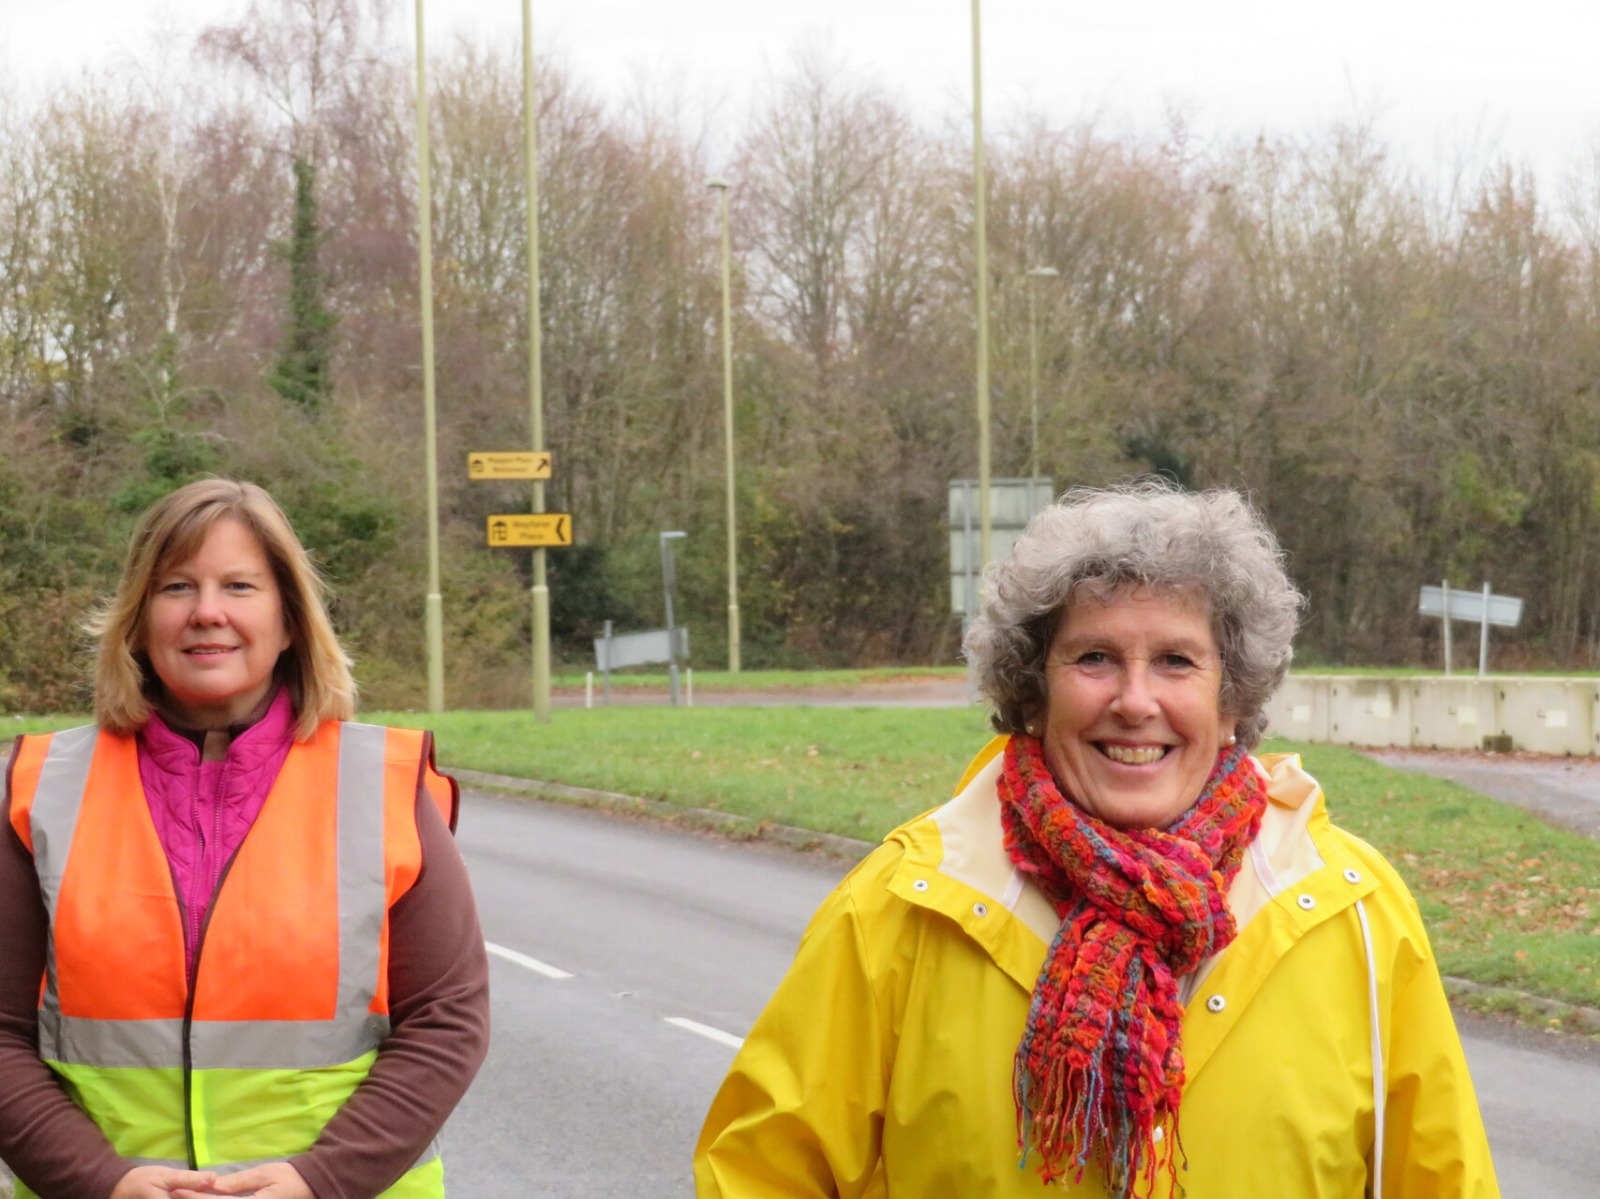 Jackie and Yvette on the A31